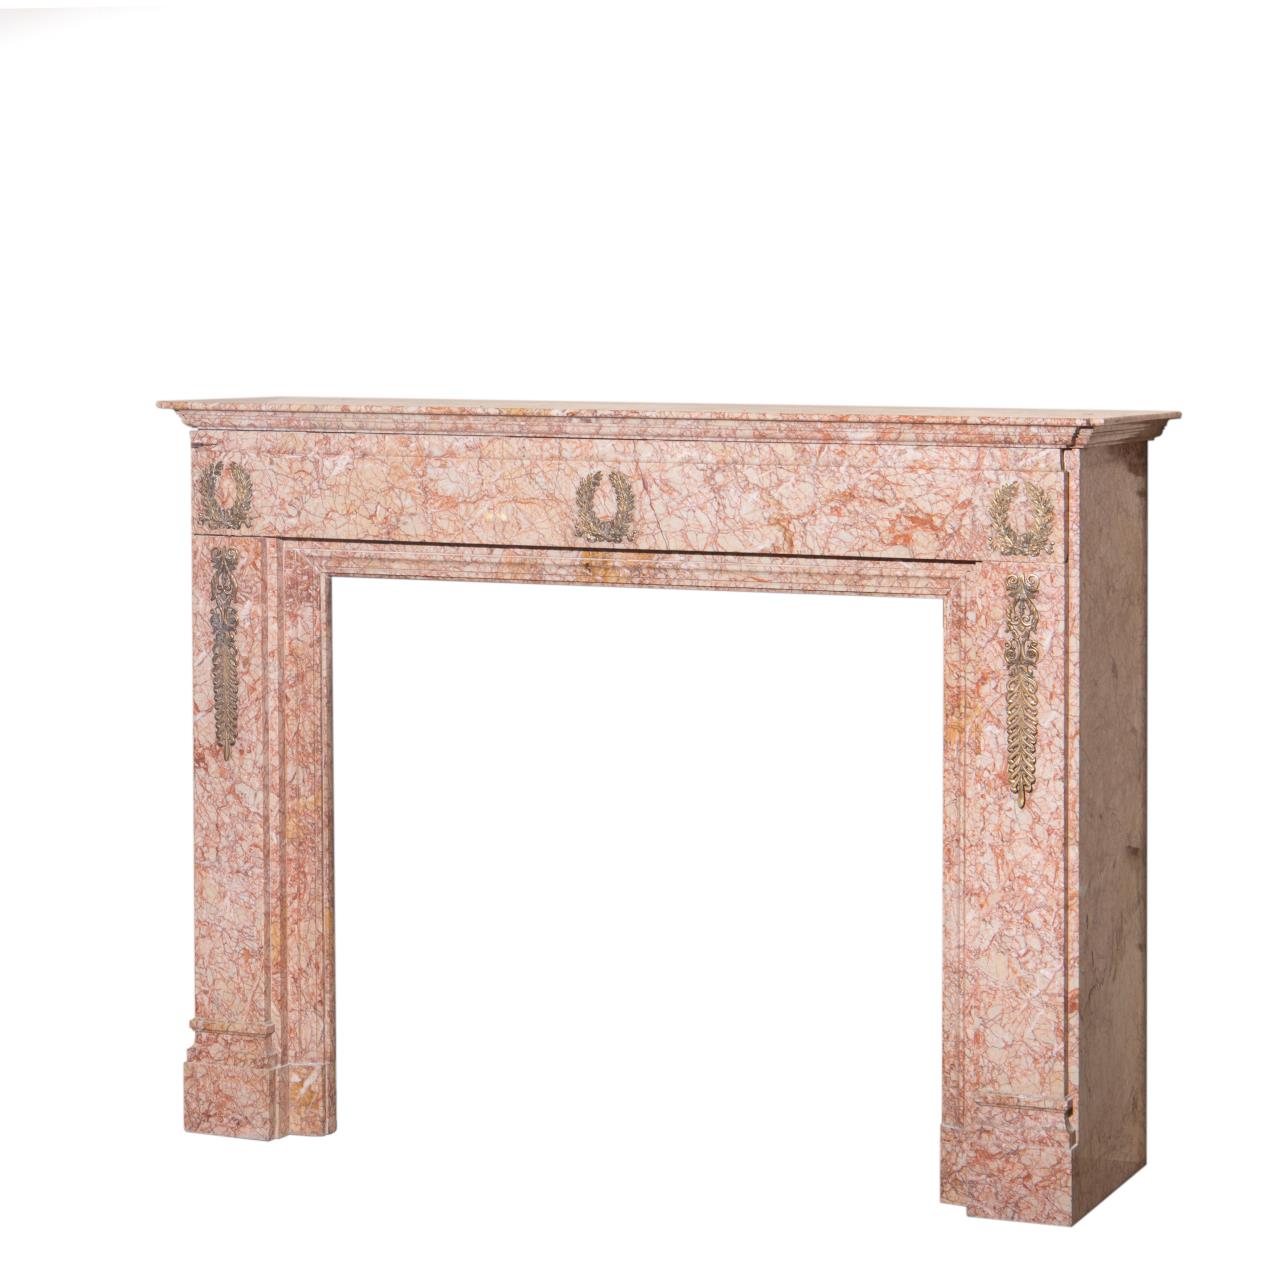 EMPIRE STYLE PINK MARBLE ORMOLU 35d692